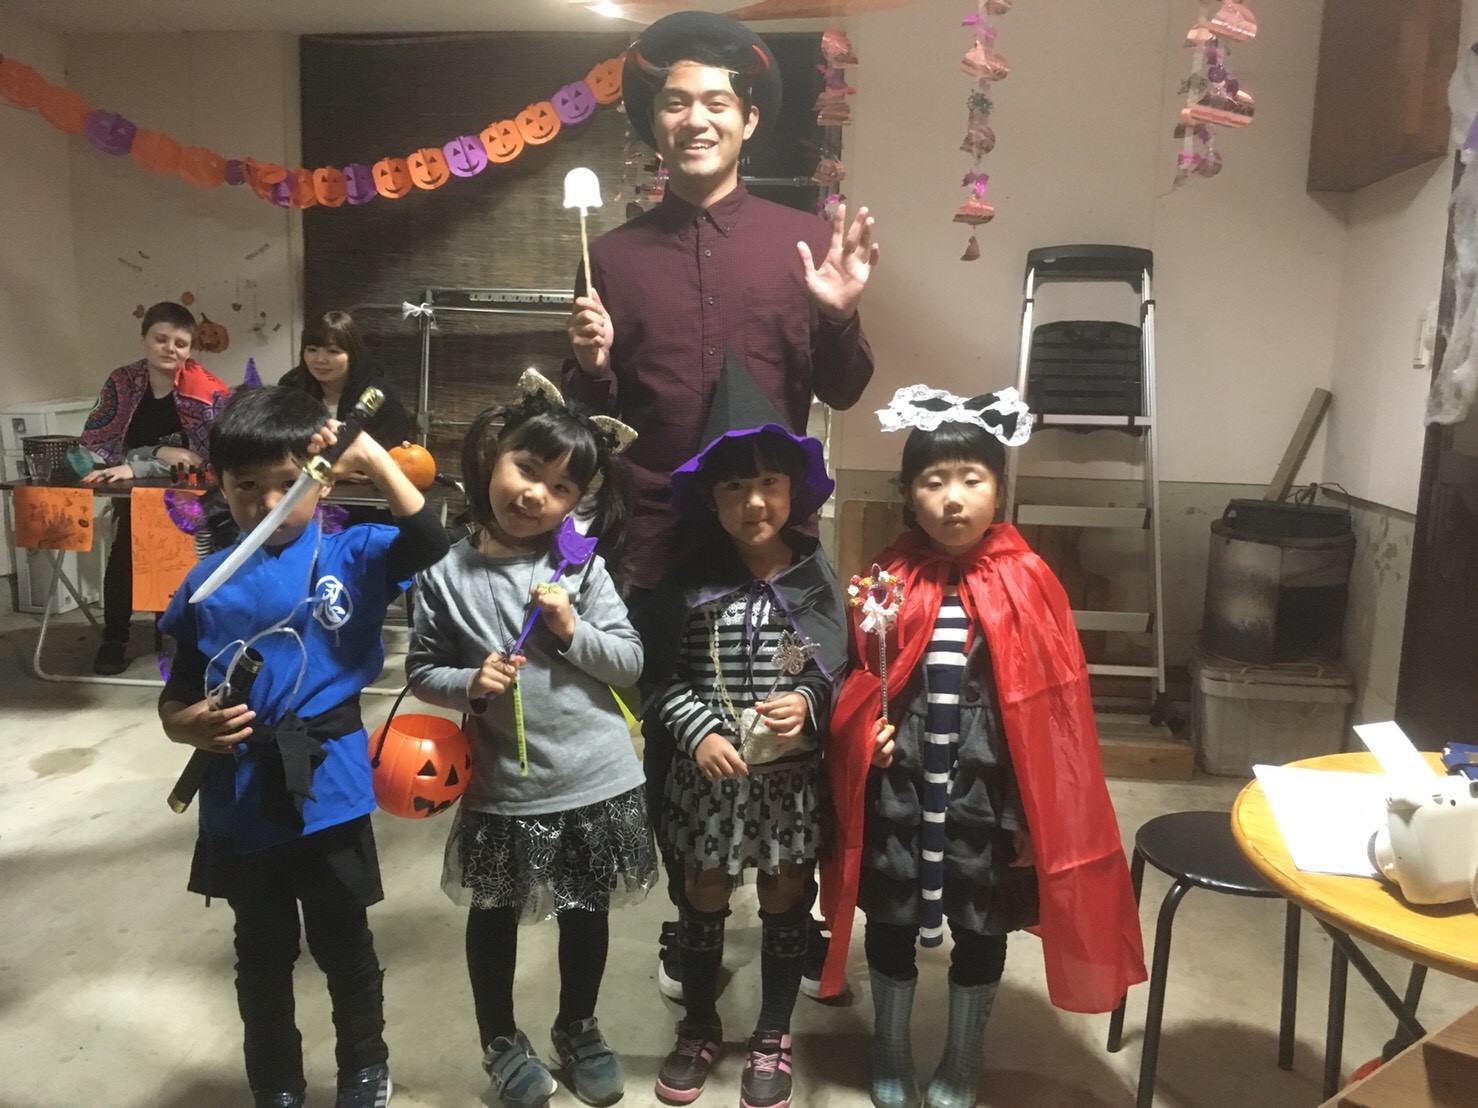 Six Japanese elementary students and preschoolers celebrating Halloween for the first time with help from Martinez, who volunteers at an English Conversation School in Japan.